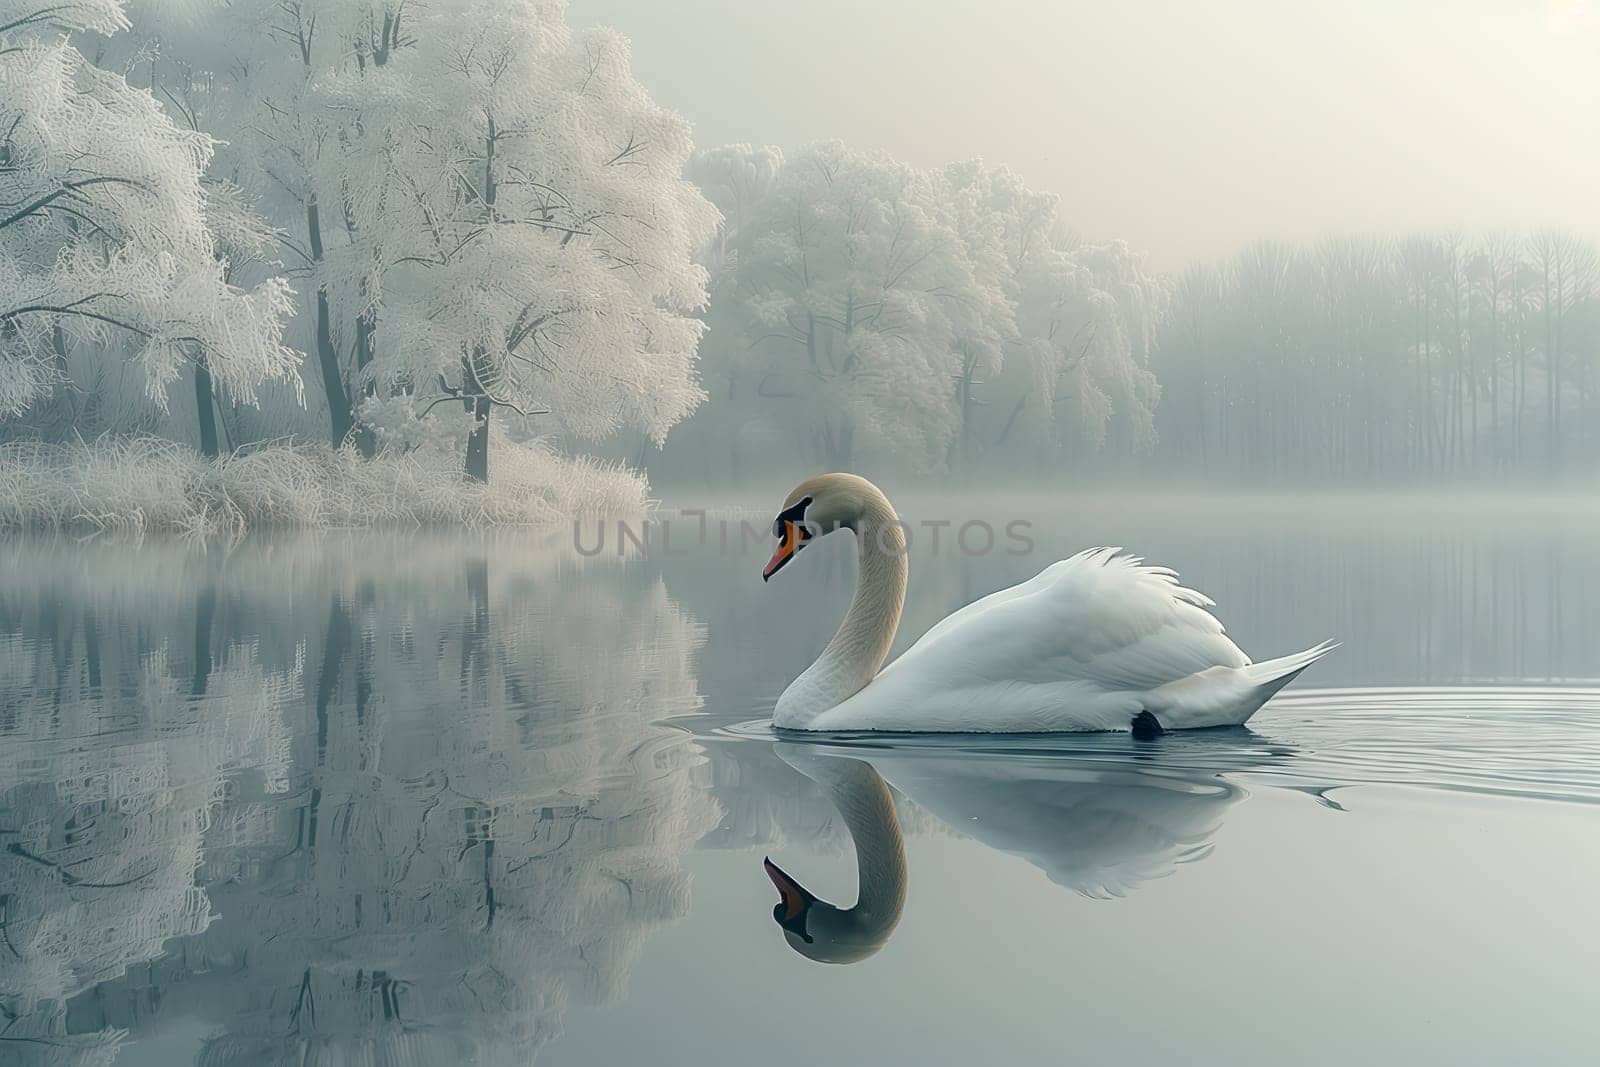 A swan gracefully glides through misty waters of a serene lake by richwolf